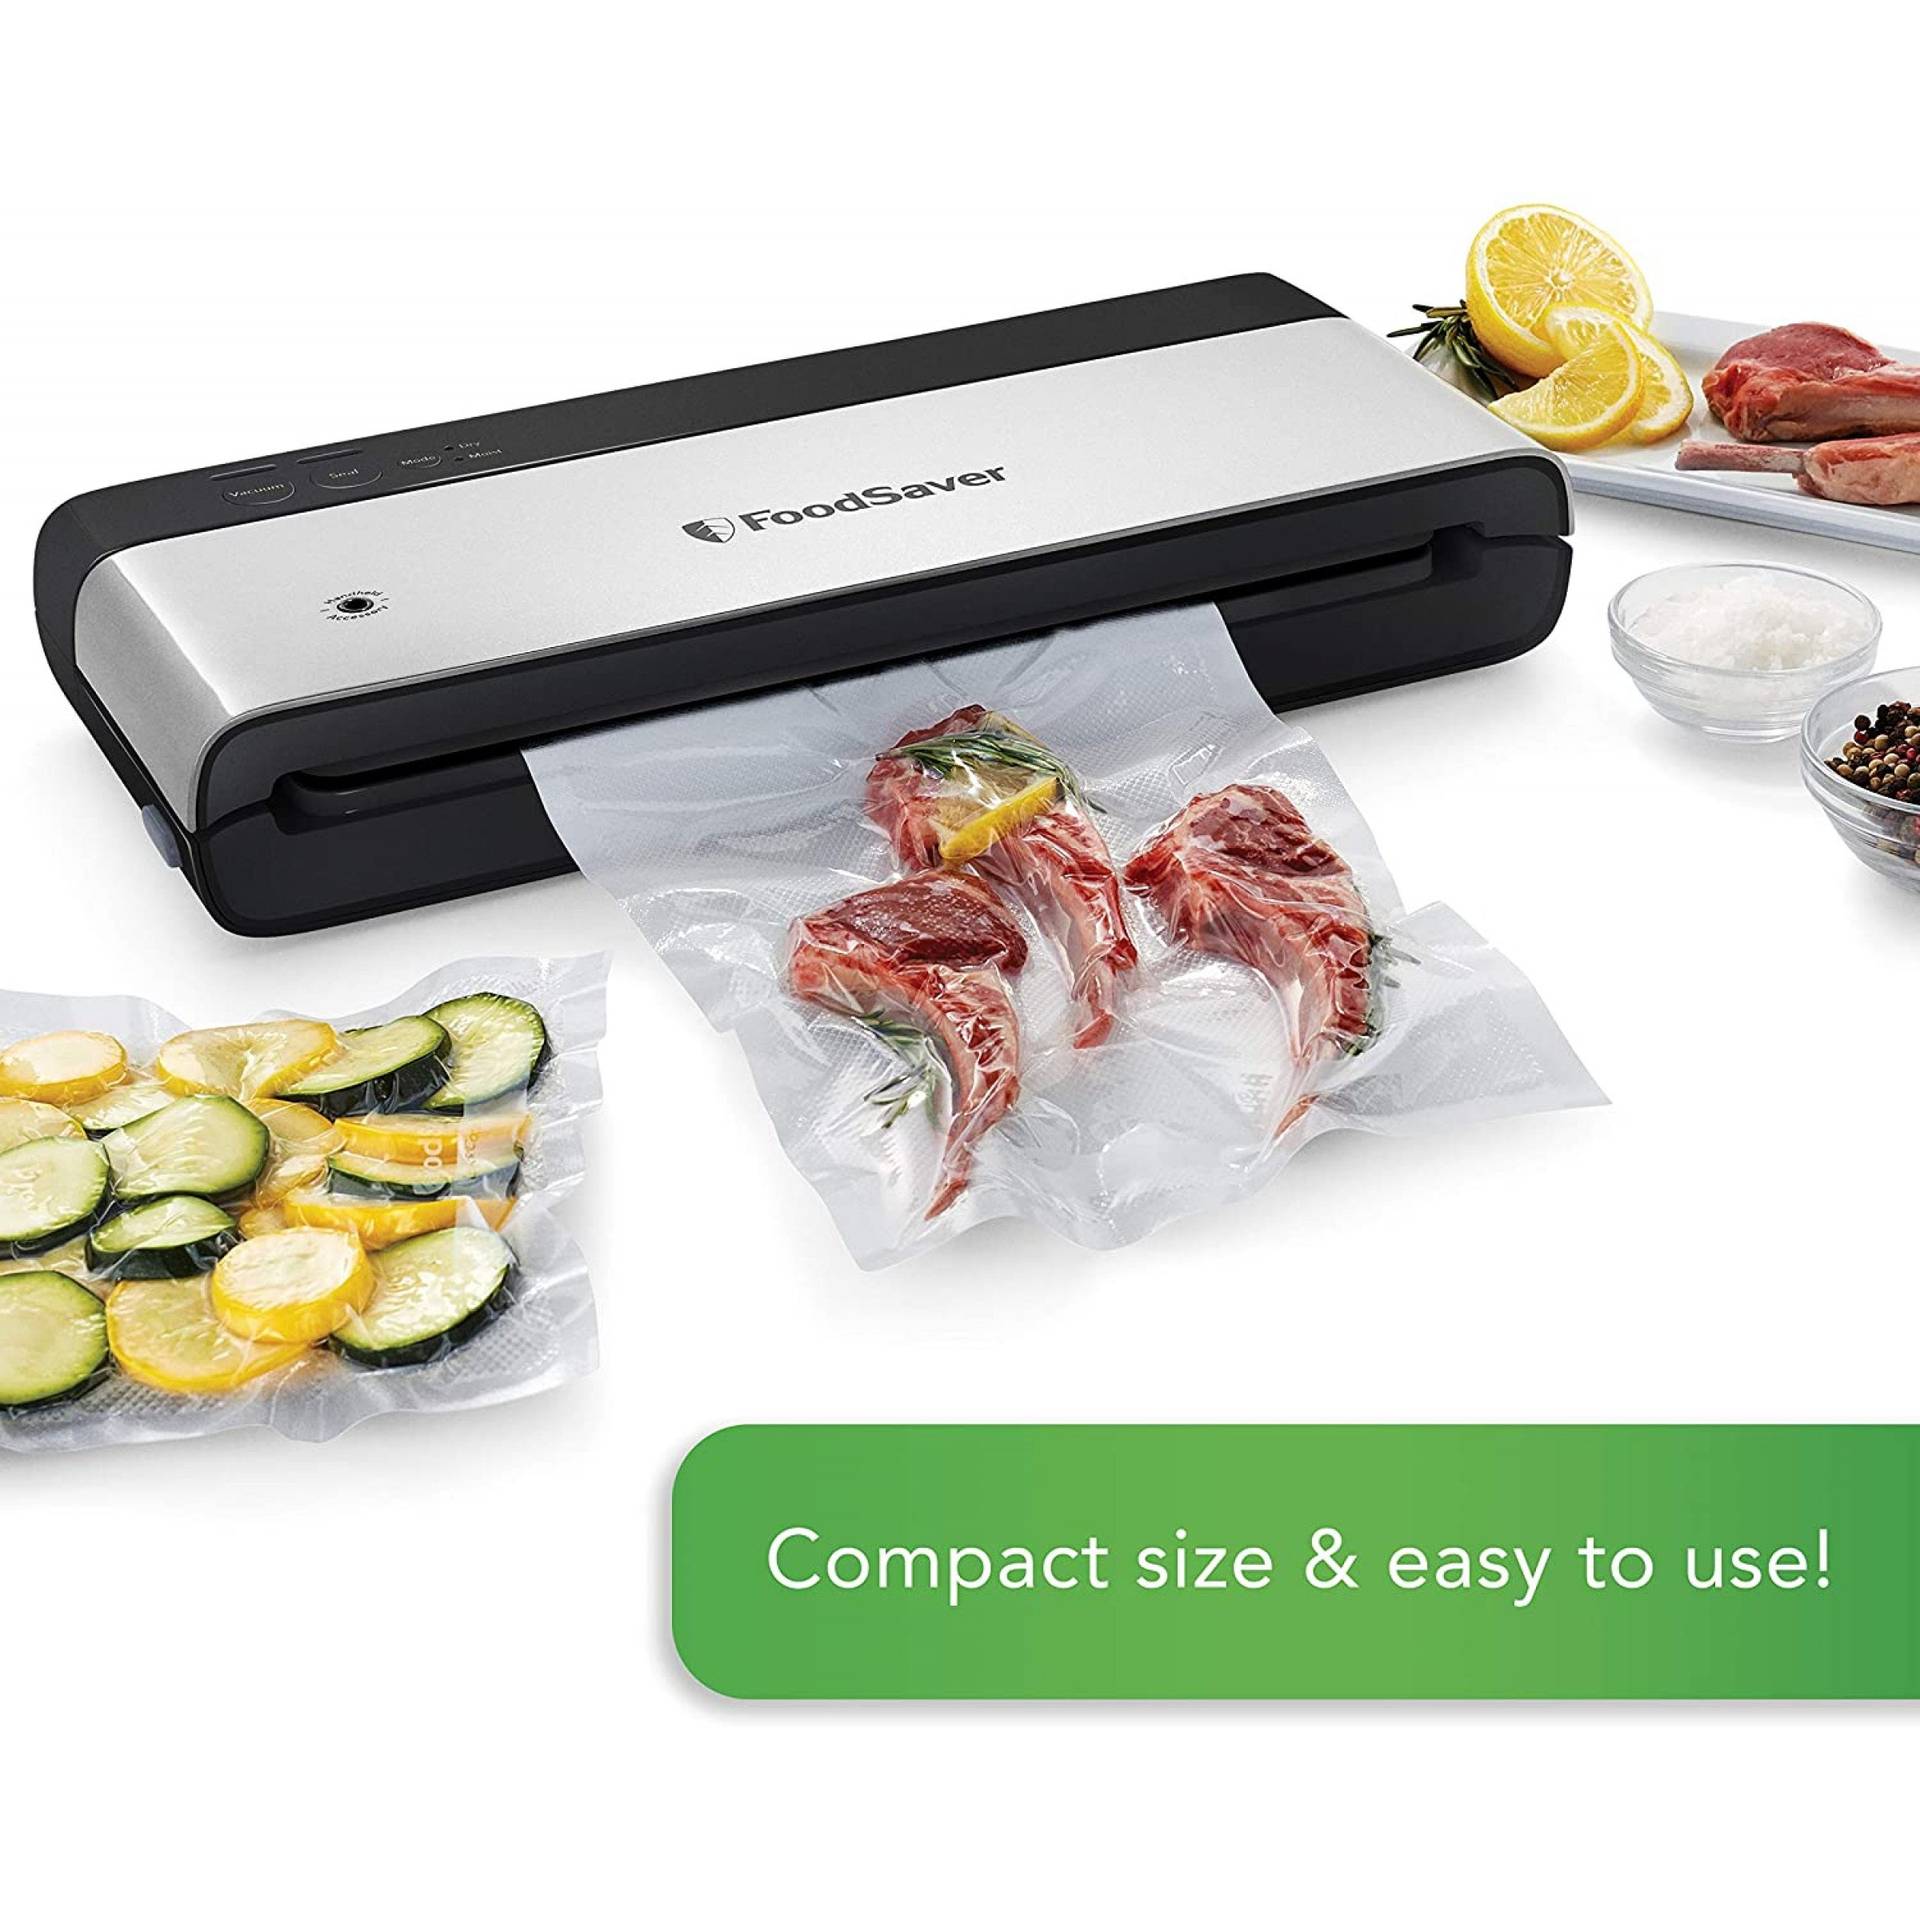 FoodSaver VS0150 PowerVac sealer seals meat in an airtight bpa-free food container leak-proof